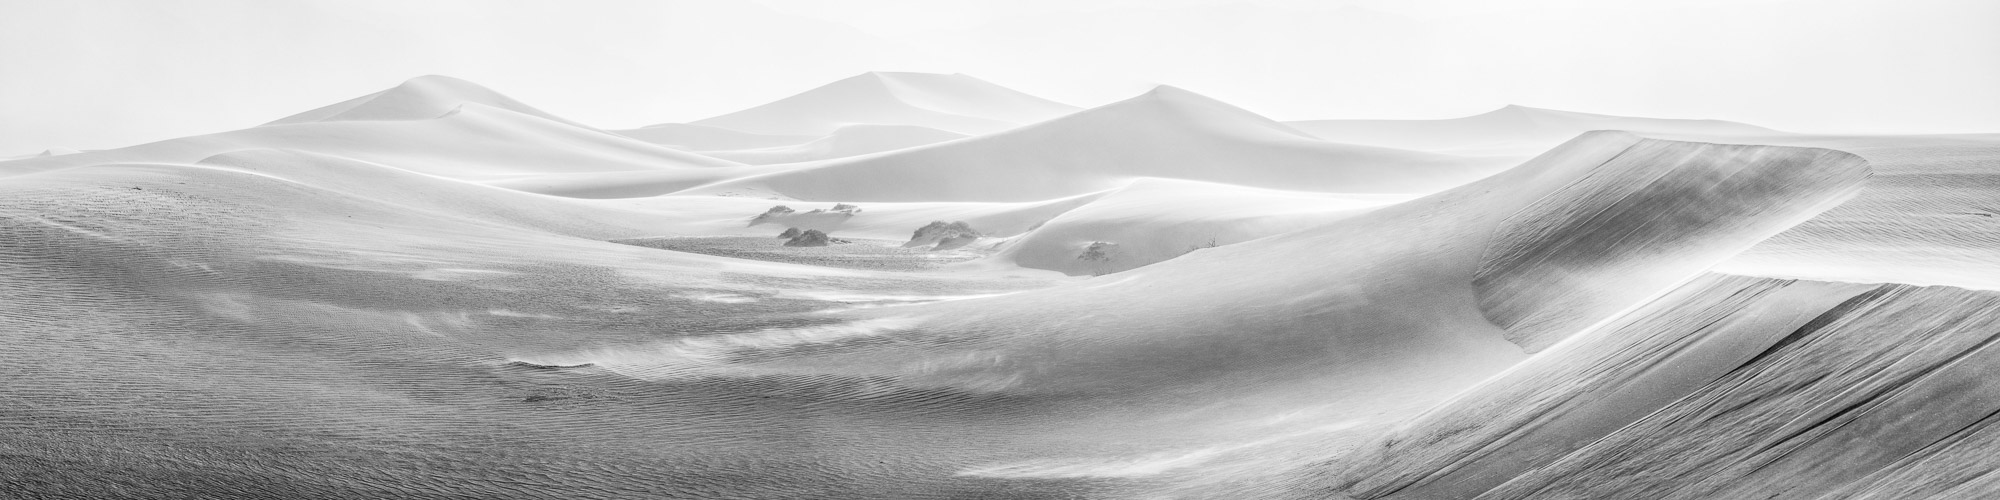 I have a passion for photographing sand dunes and have captured them in various locations around the world. However, I have never...